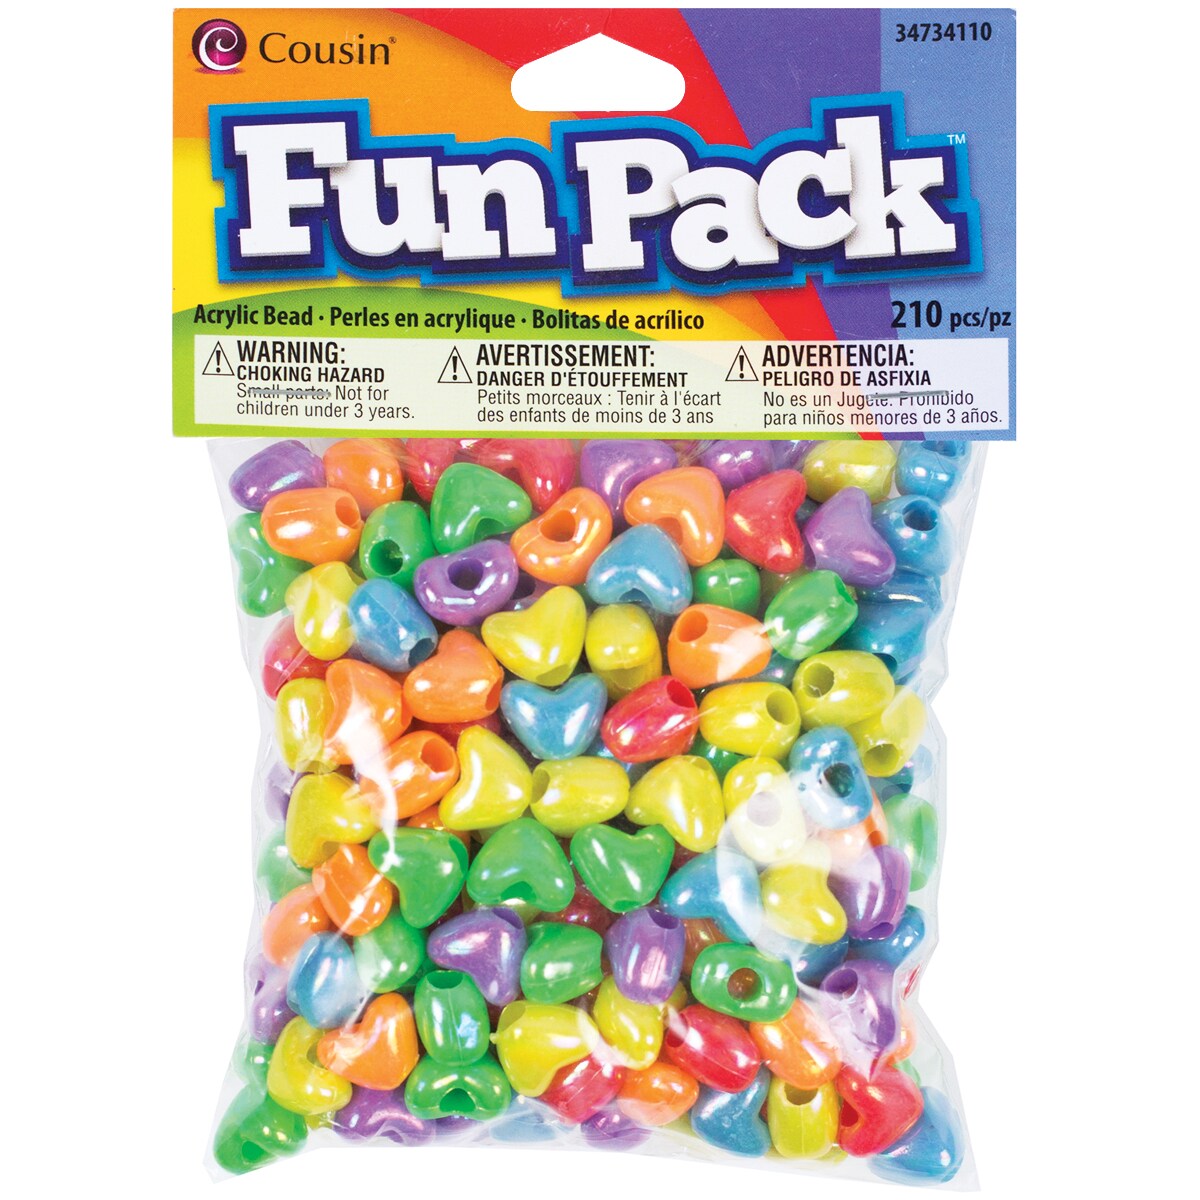 Cousin Fun Pack Acrylic Heart Beads 210/Pkg-Assorted Colors